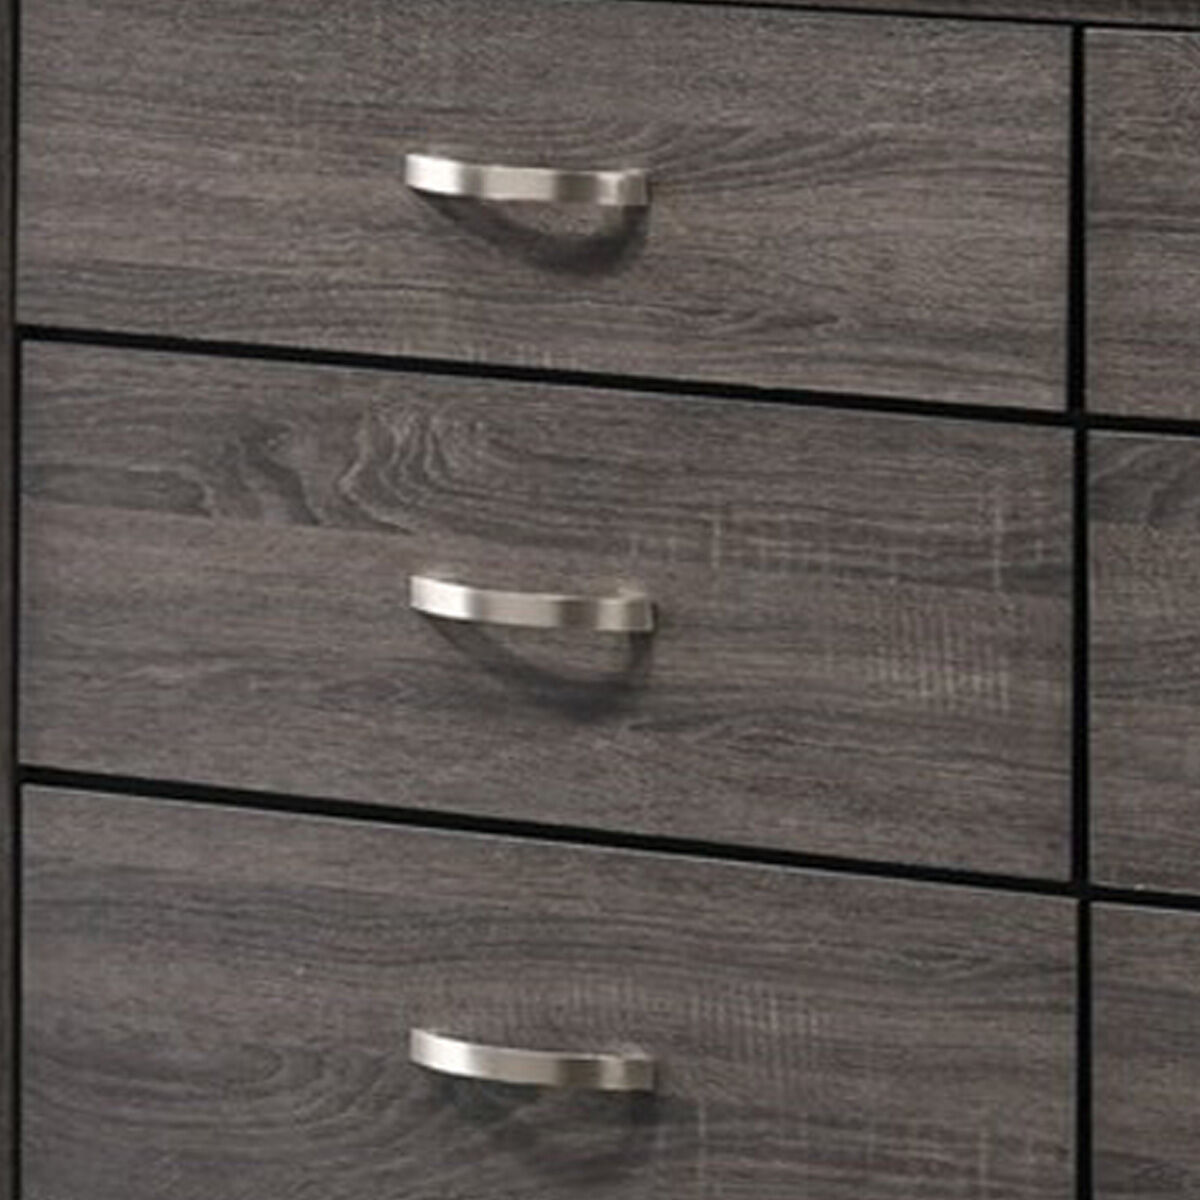 Transitional Style Dresser with 6 Drawers and Metal Pulls, Gray and Black